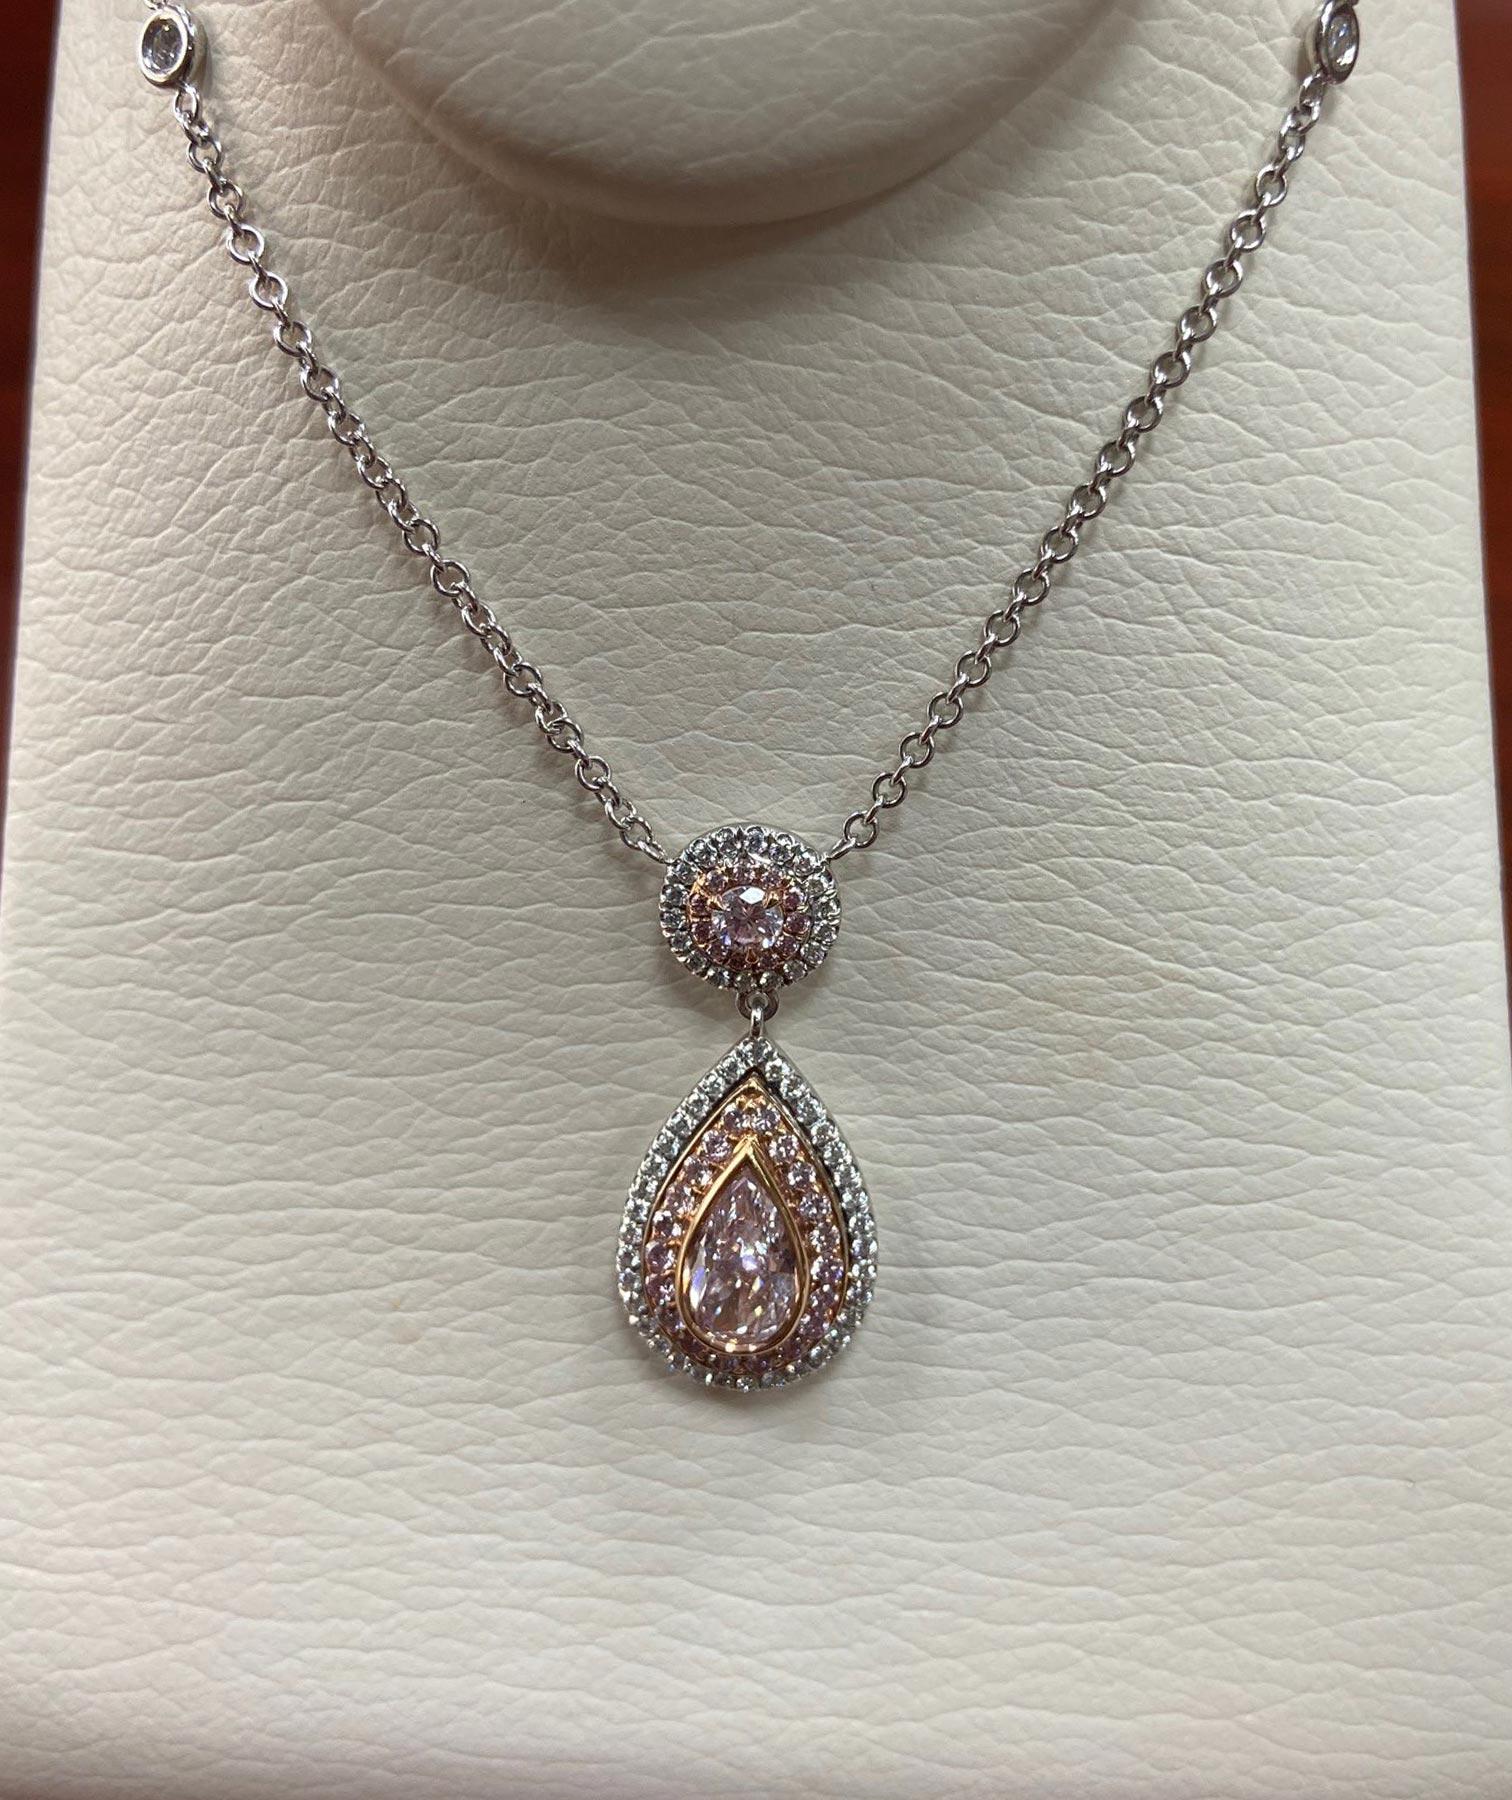 This stunning pendant is cast in platinum and accented with 18 karat rose gold. The featured center diamond is a .68 carat fancy light pink pear shaped diamond surrounded with round fancy light pink and brilliant colorless diamonds.  The connected